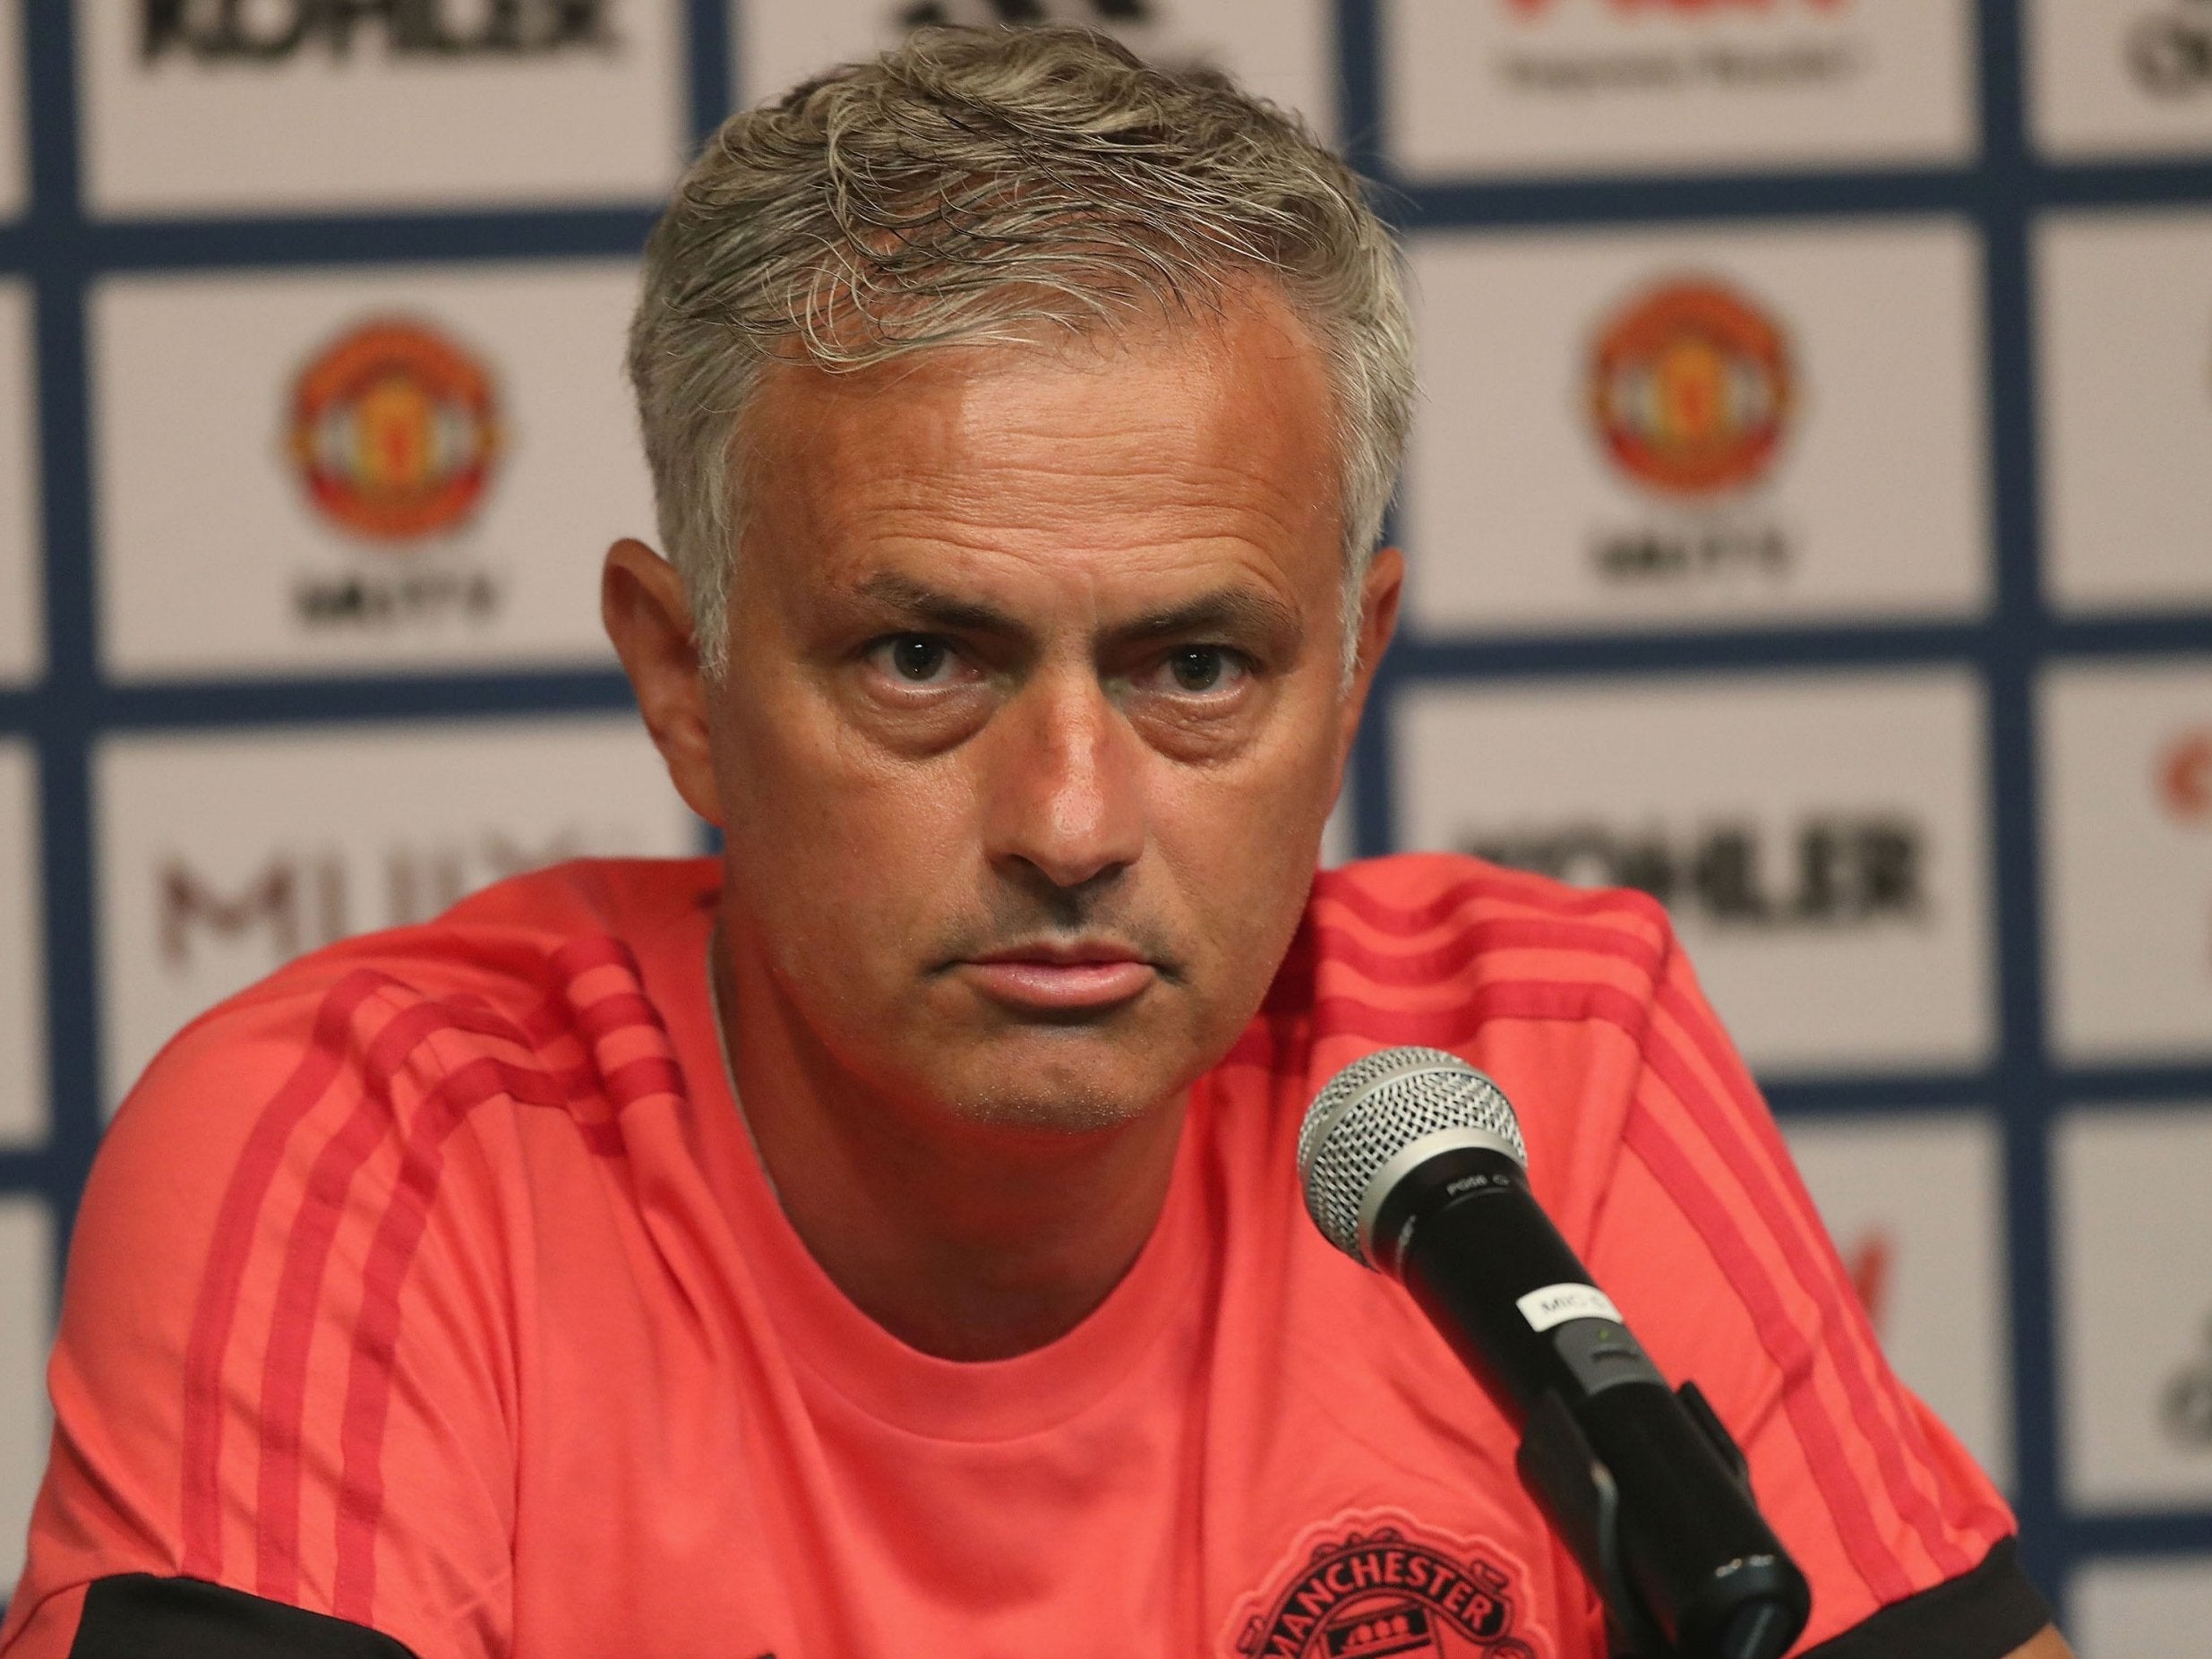 Jose Mourinho's surly press conference appearances have helped no-one